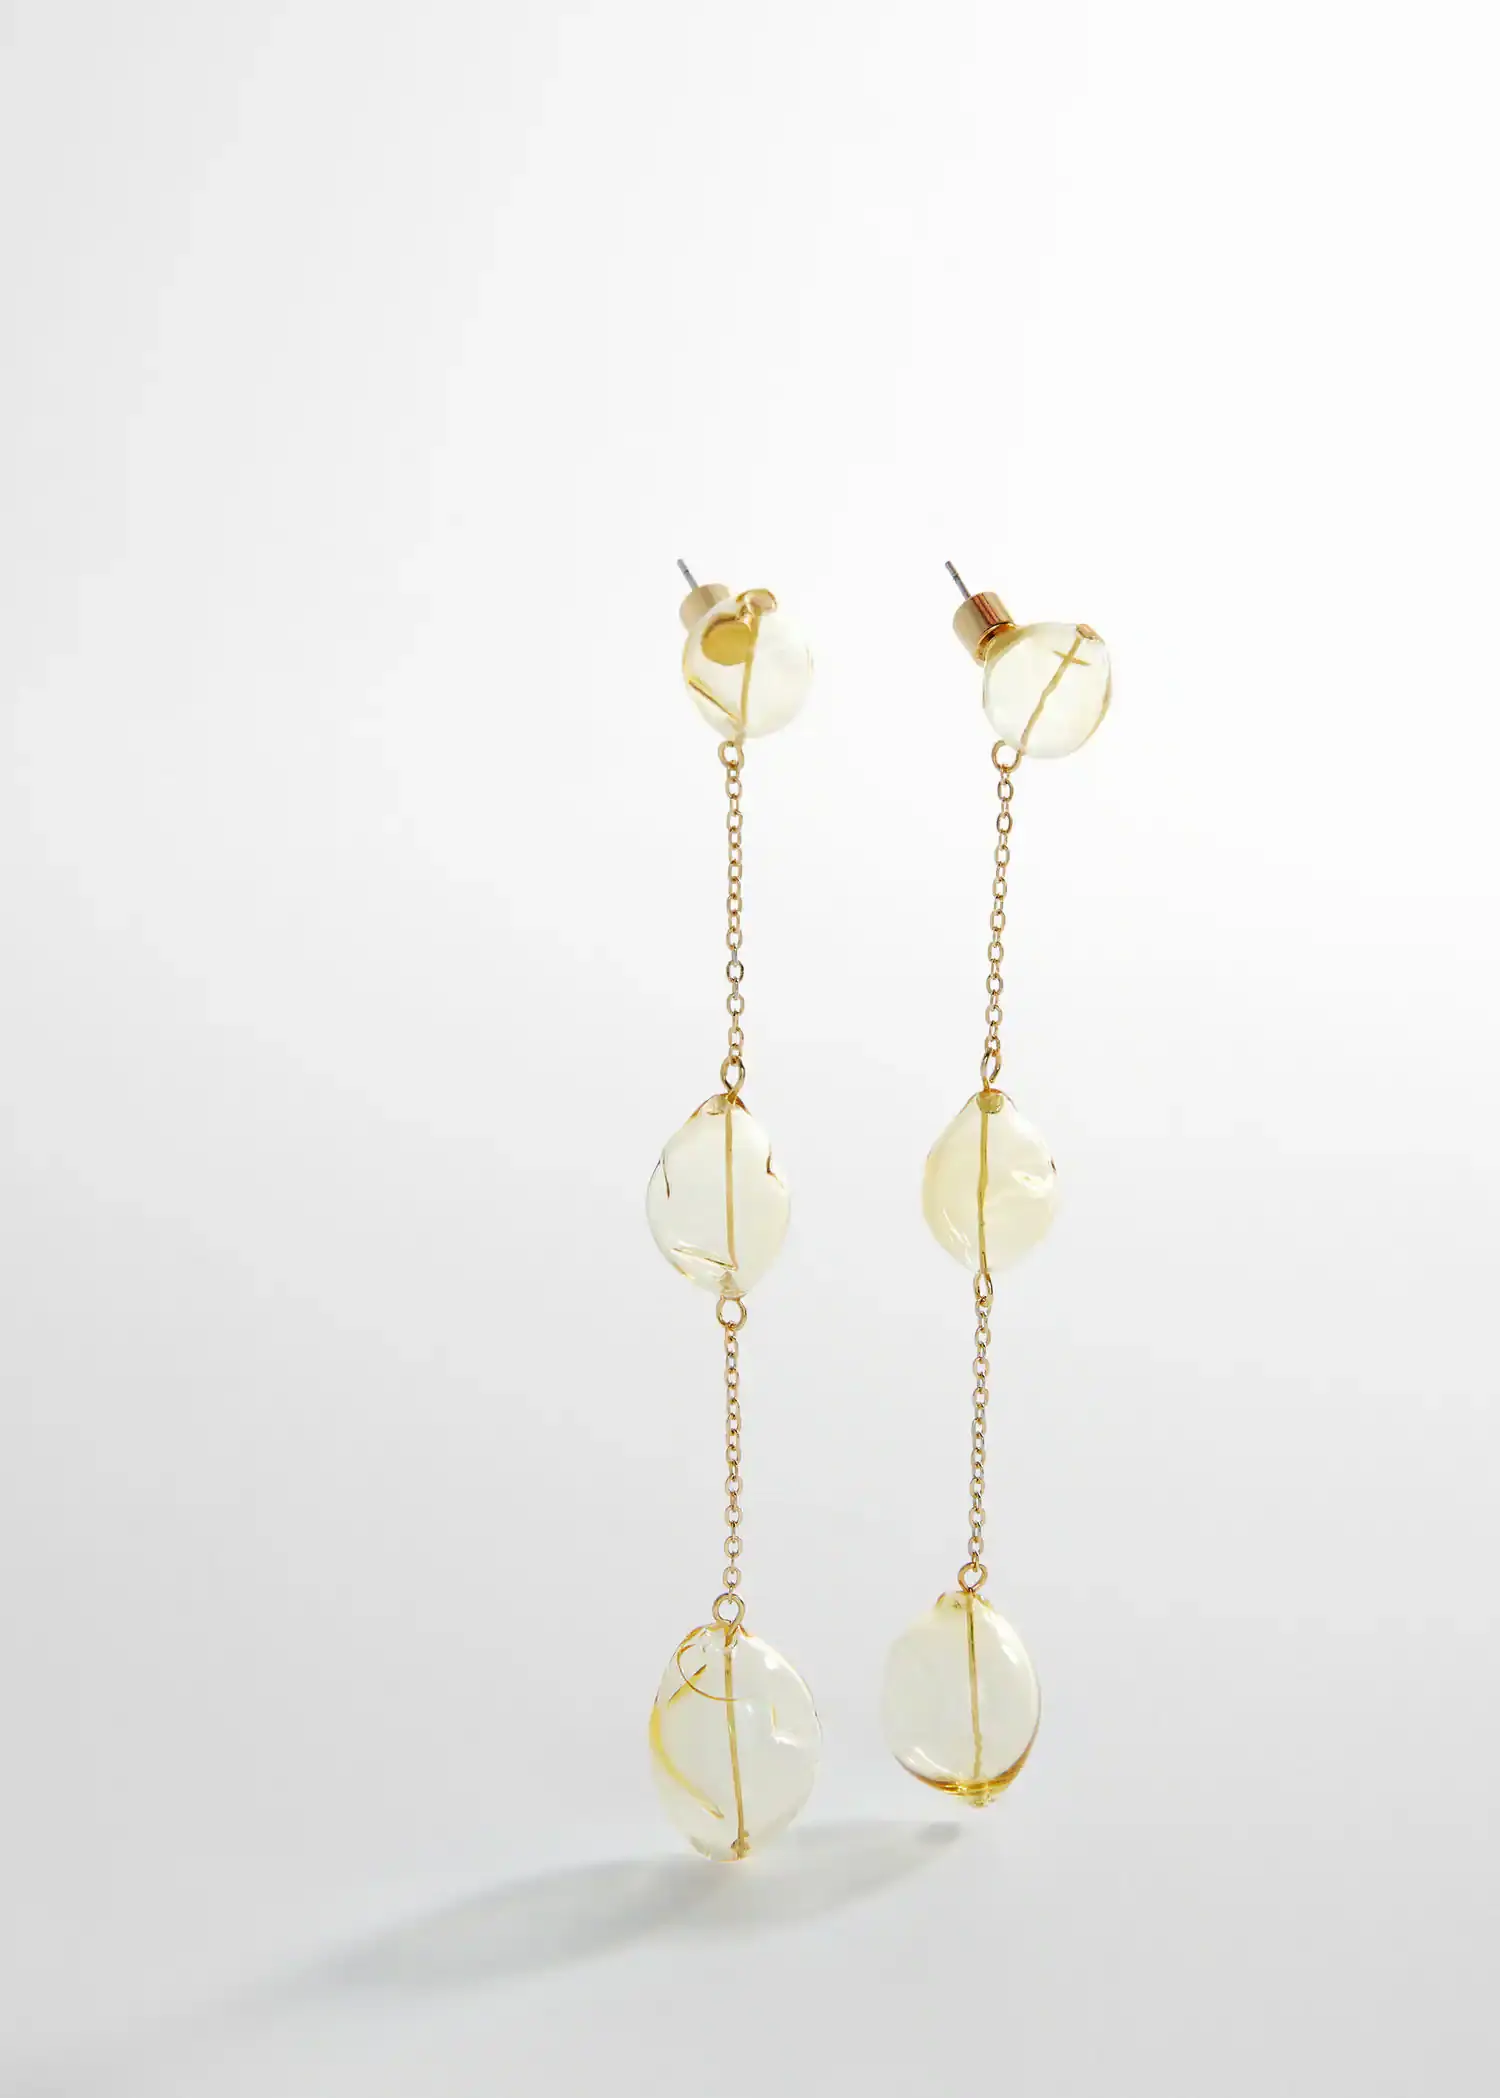 Mango Crystal thread earrings. a pair of earrings hanging from a chain. 